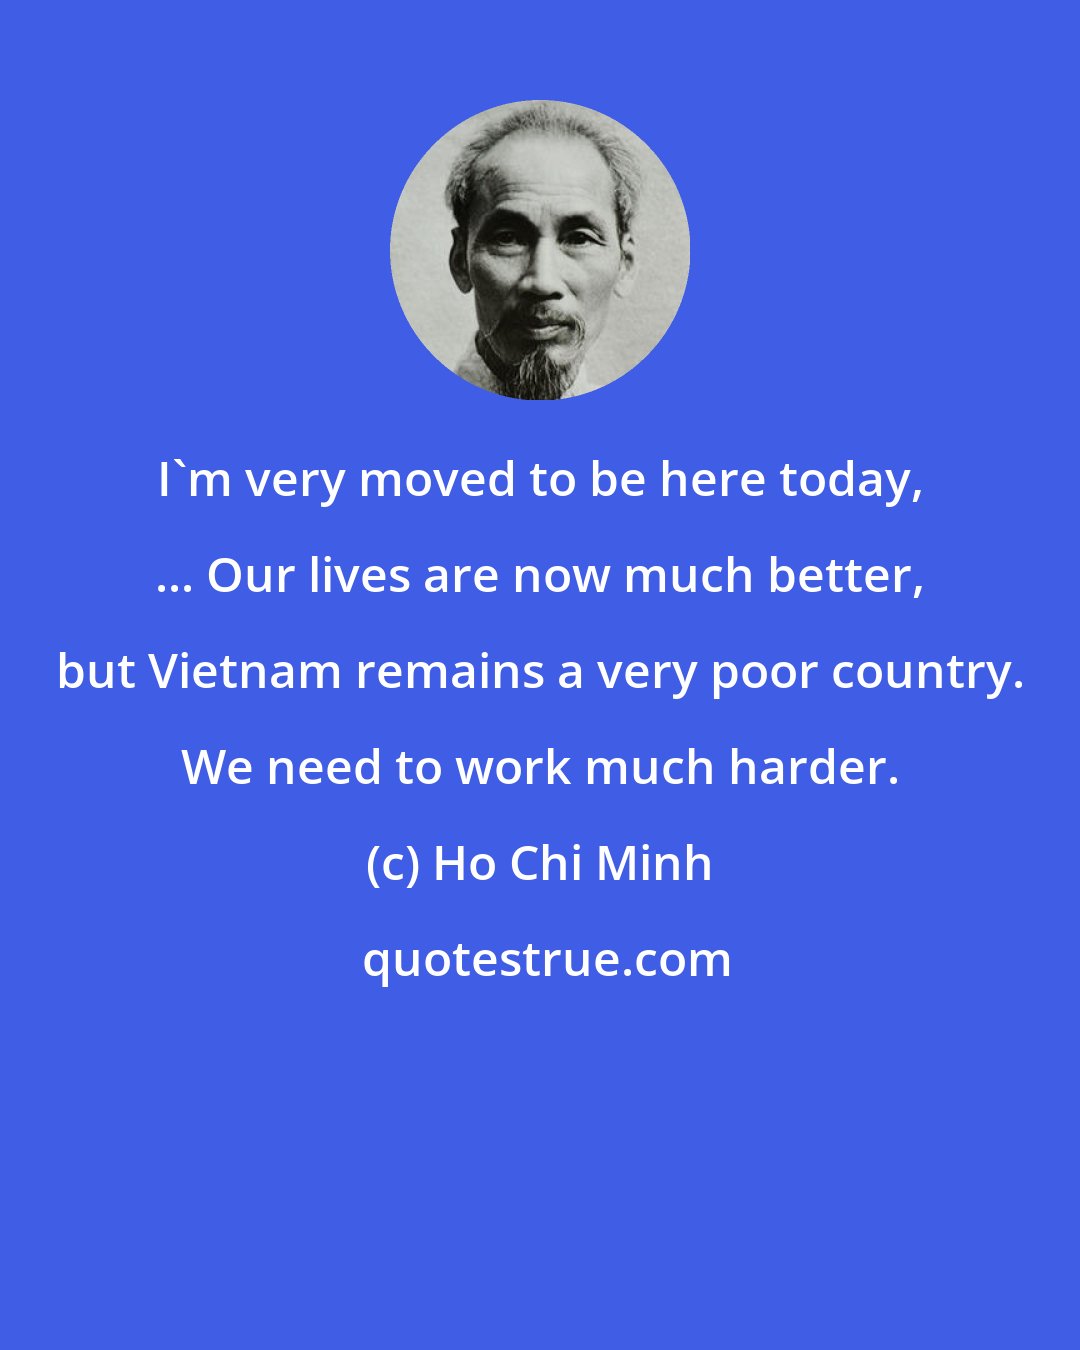 Ho Chi Minh: I'm very moved to be here today, ... Our lives are now much better, but Vietnam remains a very poor country. We need to work much harder.